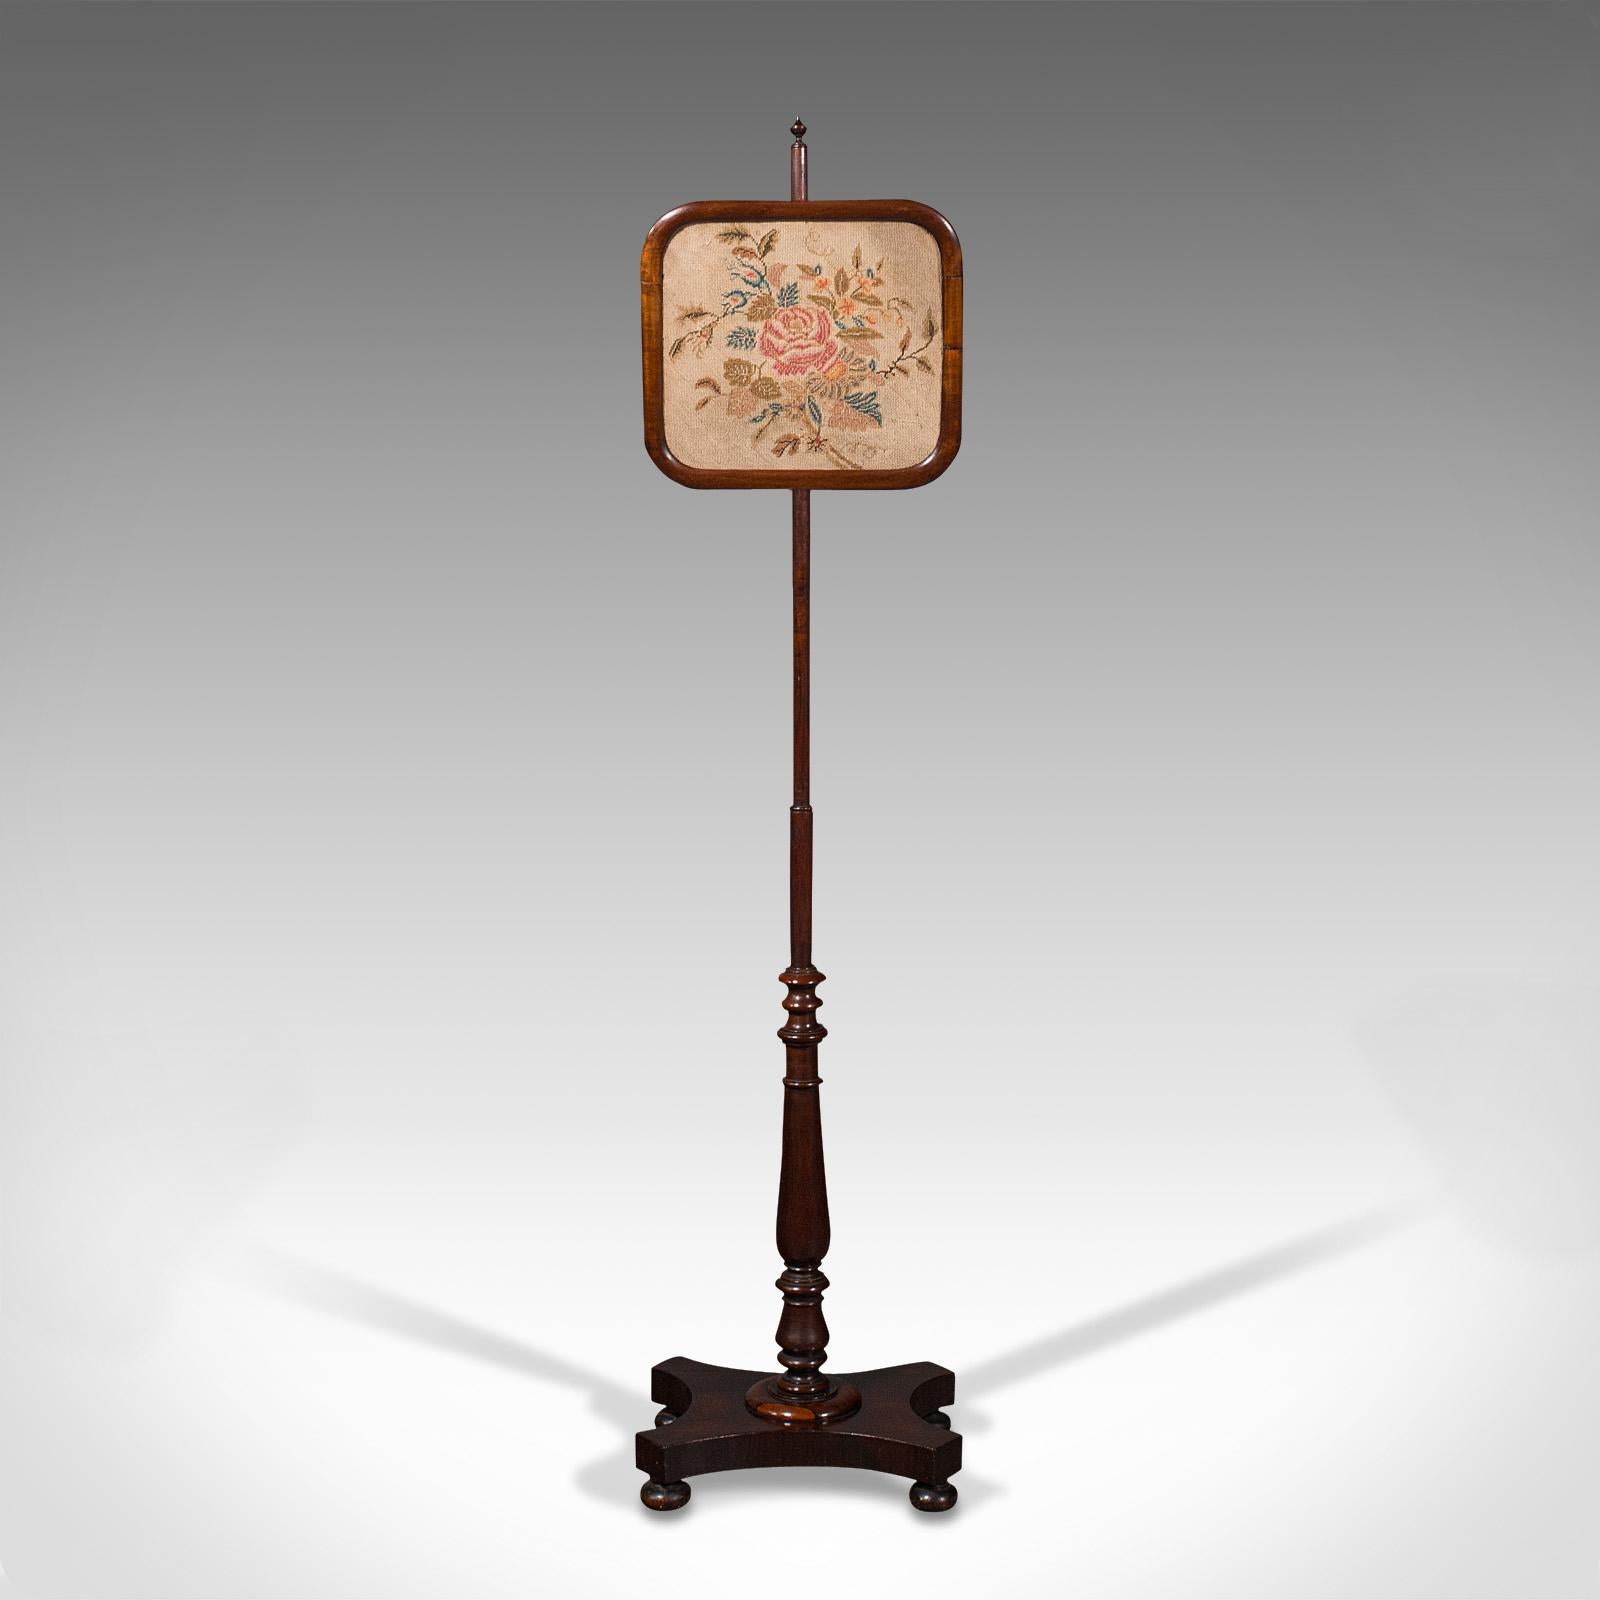 This is an antique adjustable pole screen. An English, Rosewood needlepoint fire shield, dating to the Regency period, circa 1830.

Quality Regency period fireside screen
Displays a desirable aged patina throughout
Select stocks show fine grain